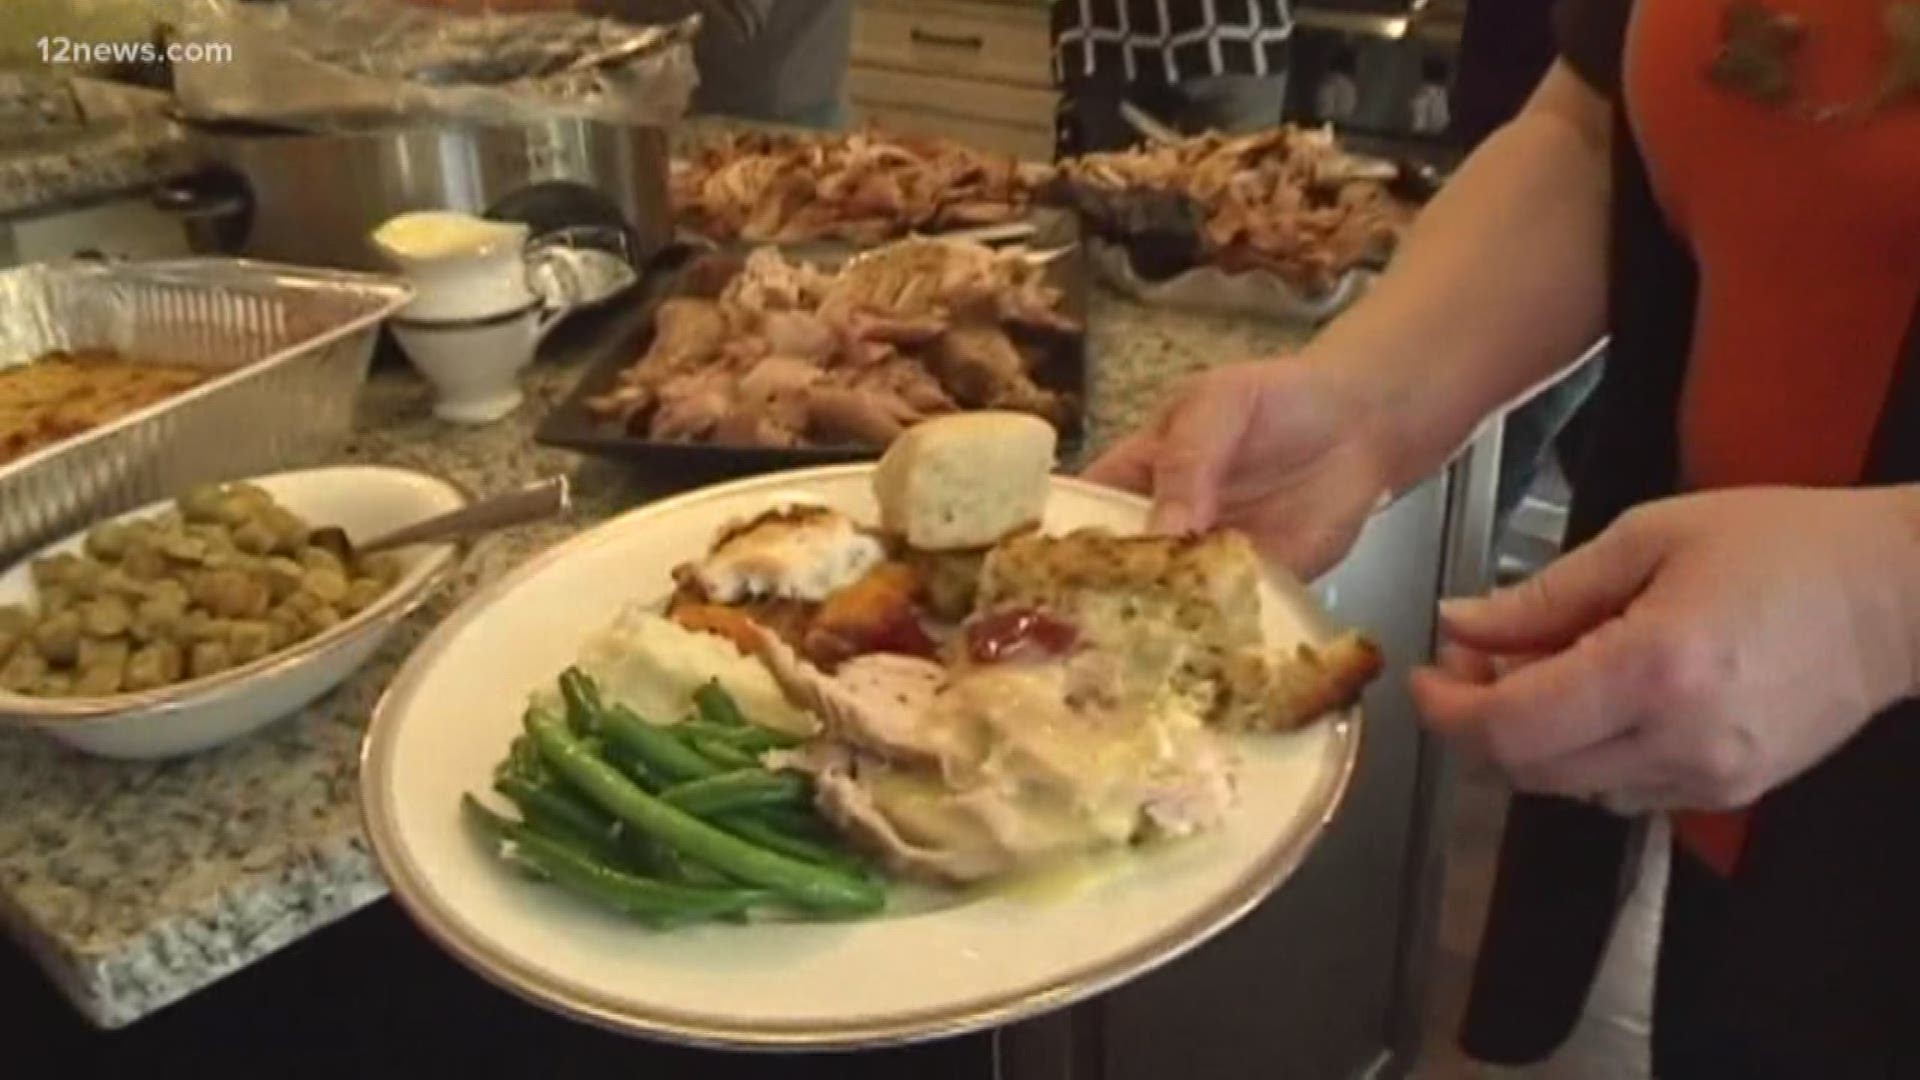 With lots of family and friends coming over for a large dinner, one wrong move in the kitchen or with a fryer can result in a holiday horror story. We give you three common mistakes that people make with their turkey dinner and how to avoid them.